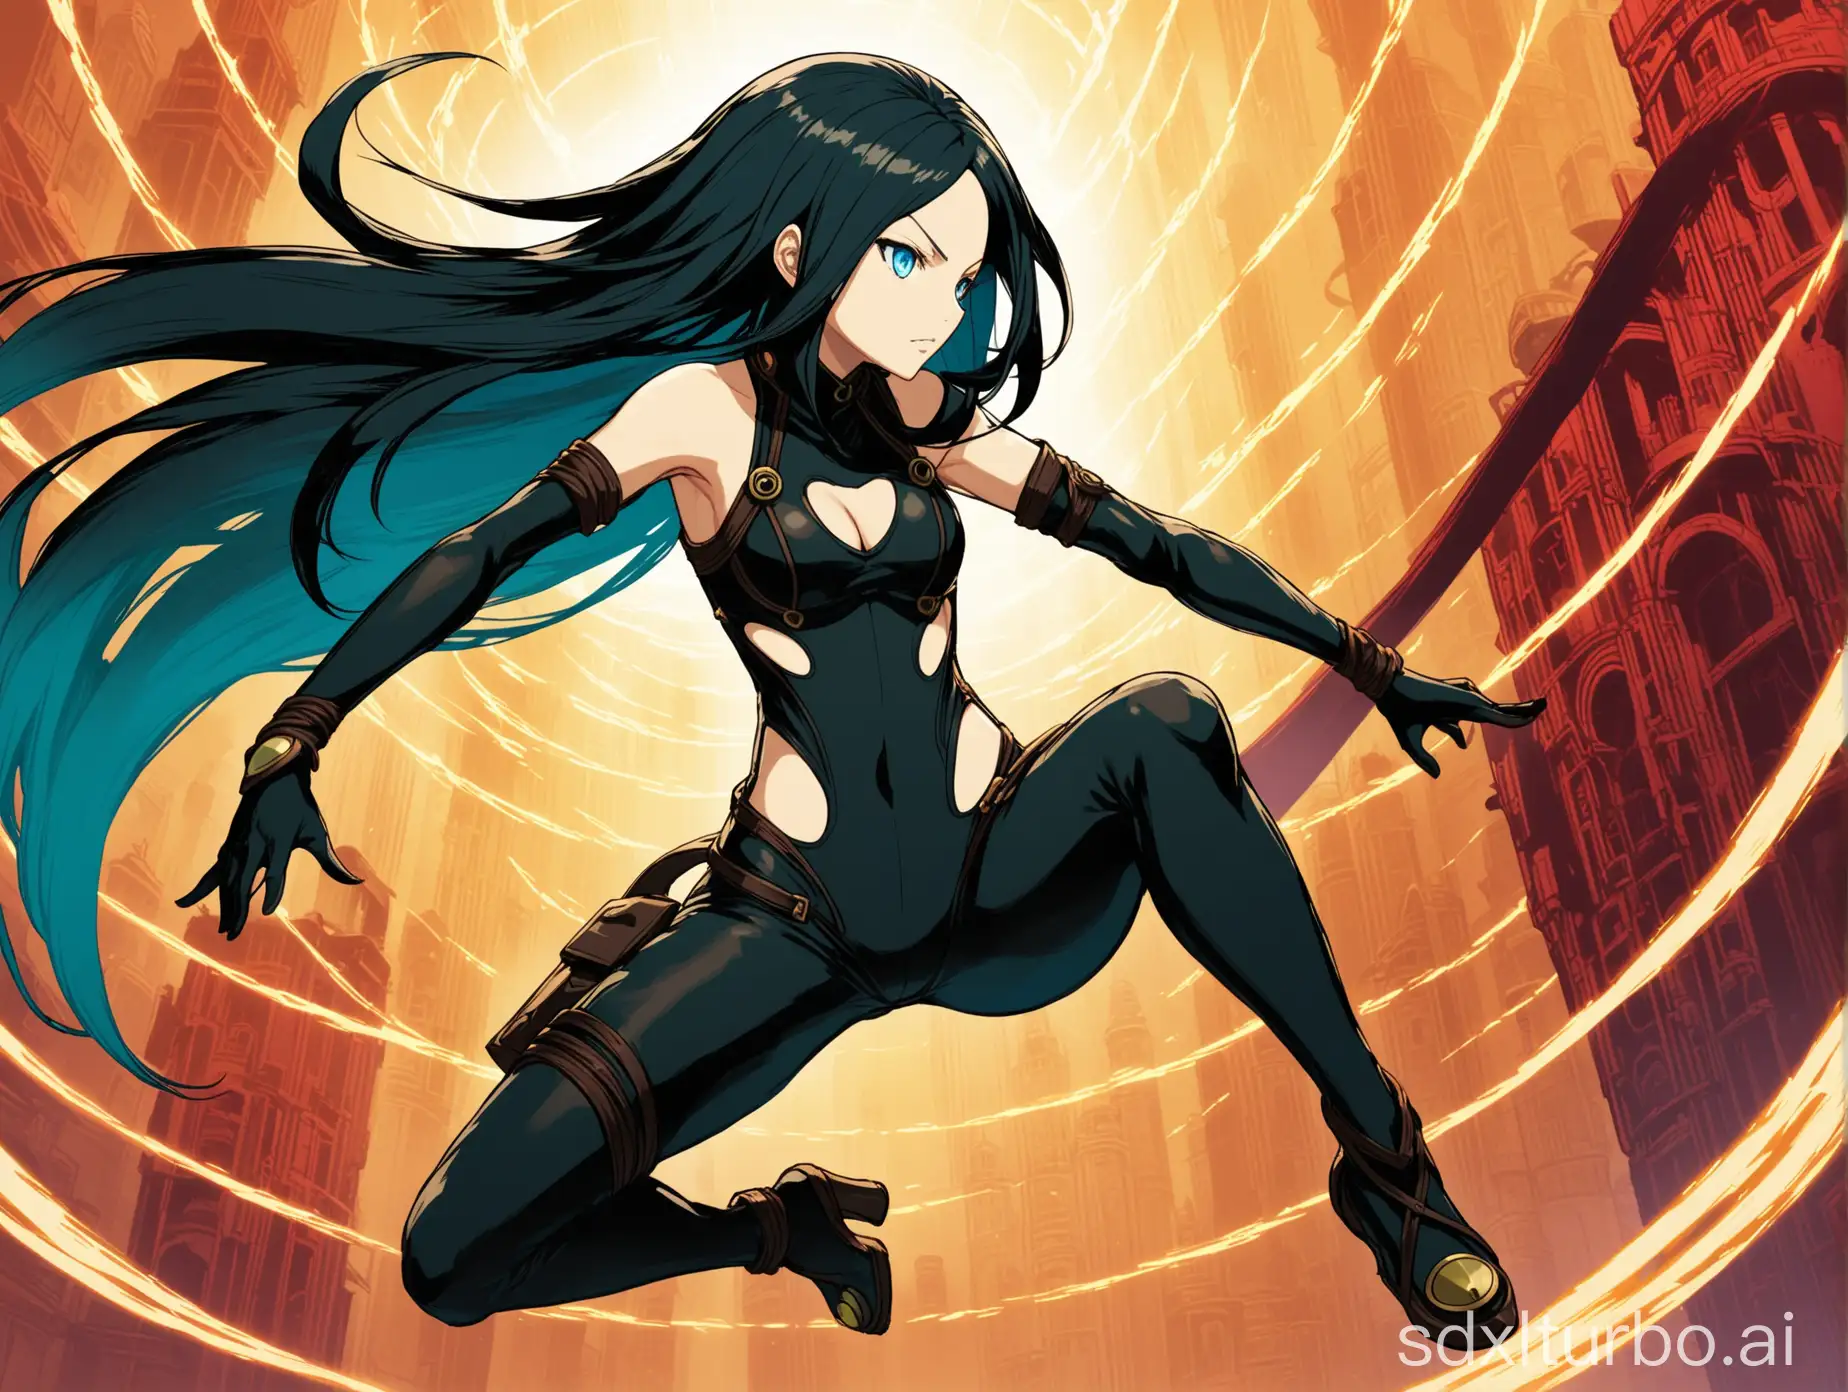 Dynamic-Raven-from-Gravity-Rush-2-Ark-of-Time-in-Black-Cat-Suit